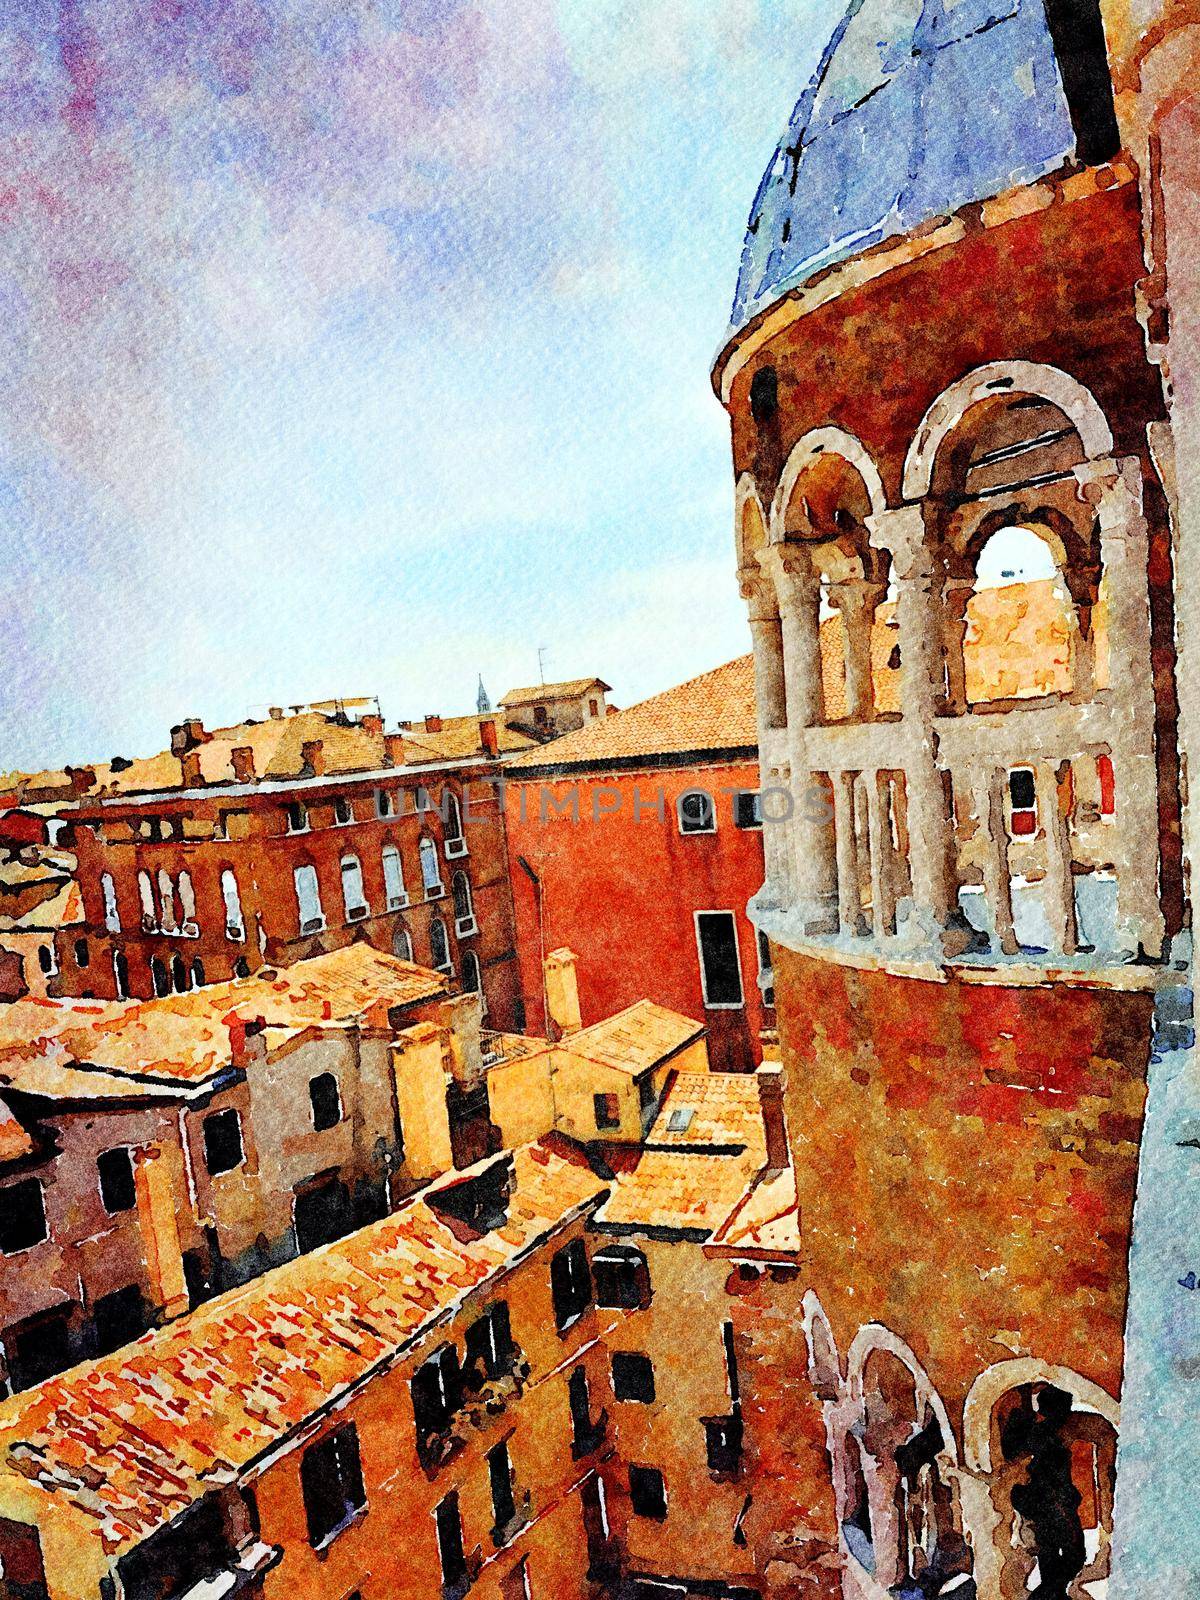 Watercolor representing a view of Venice from the balcony of a historic building in the historic center